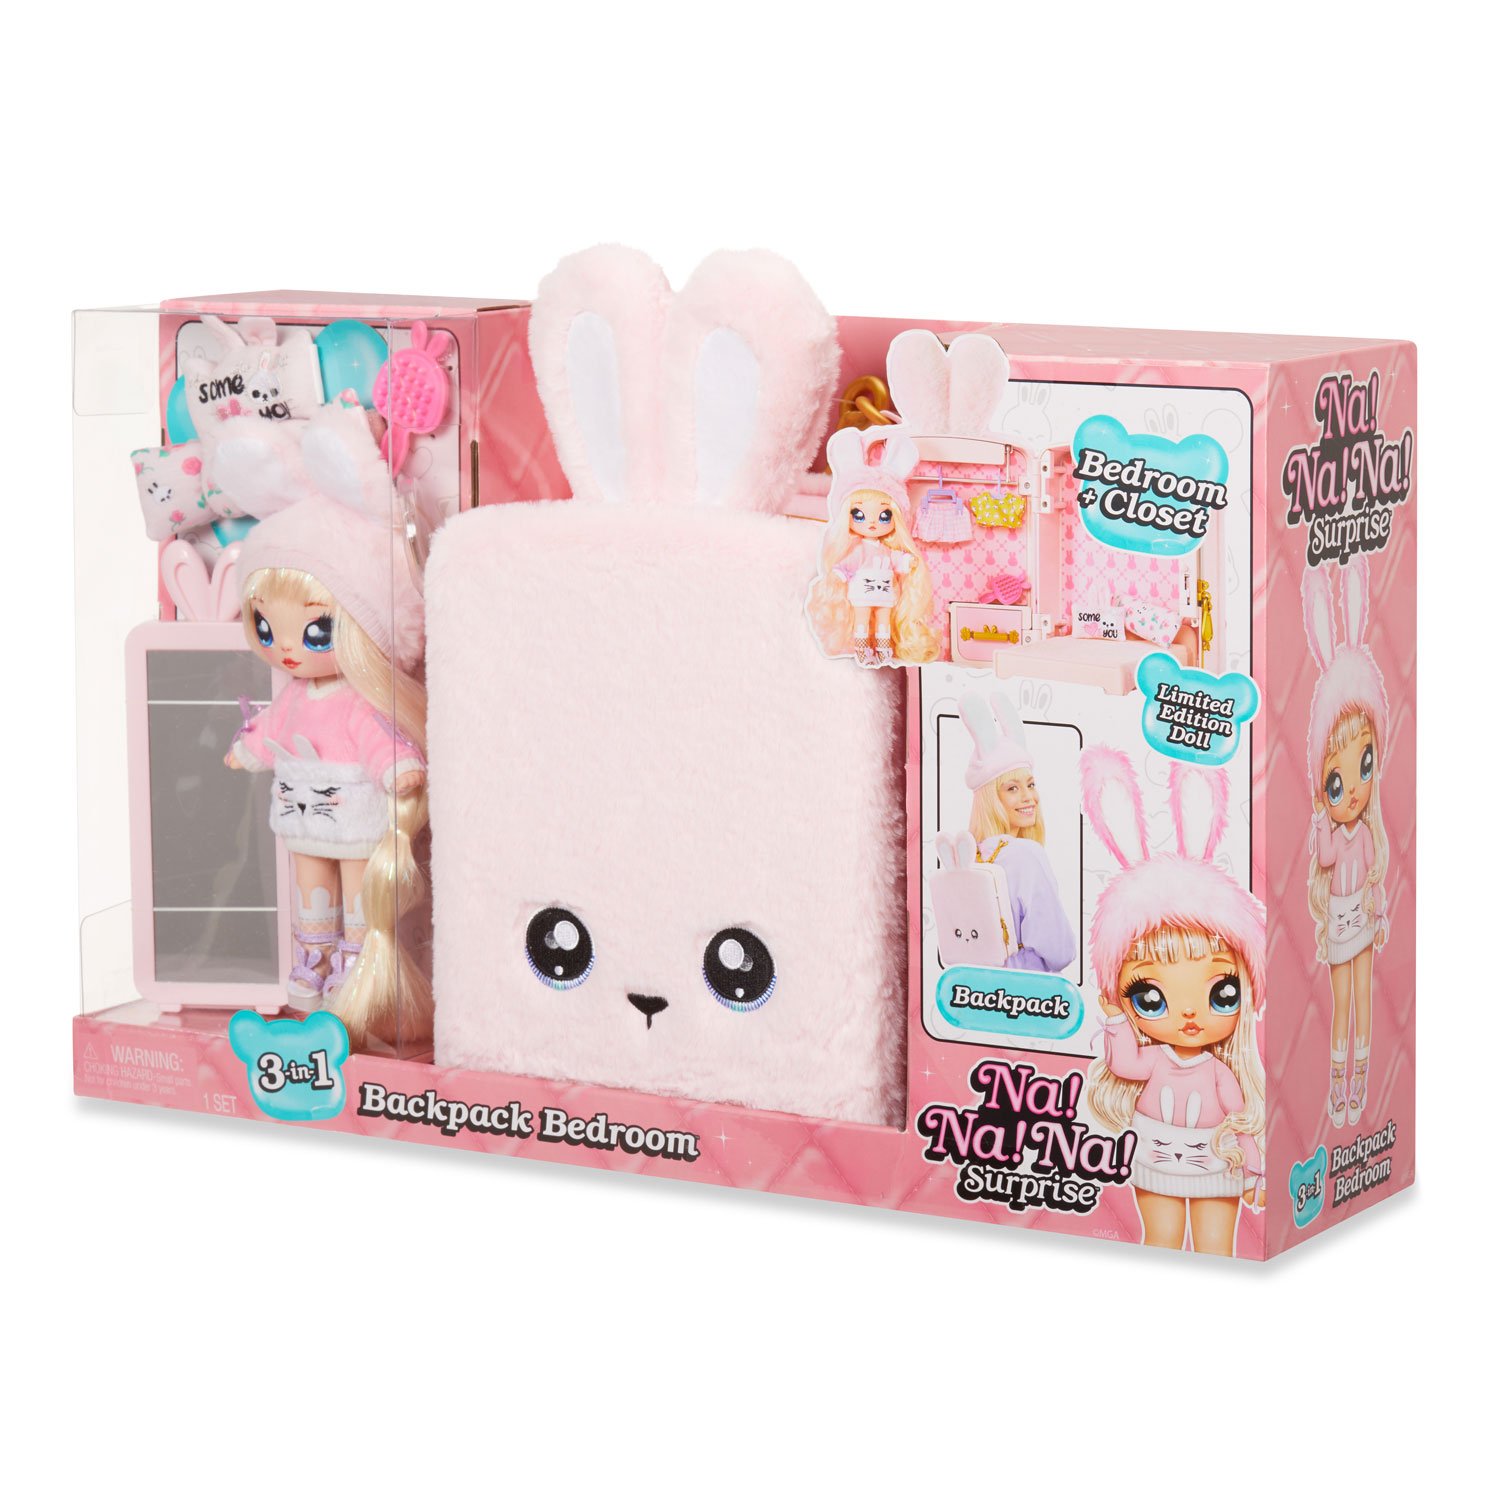 Na Na Na Surprise 3 in 1 Backpack Bedroom Pink Bunny Playset *Limited Edition 